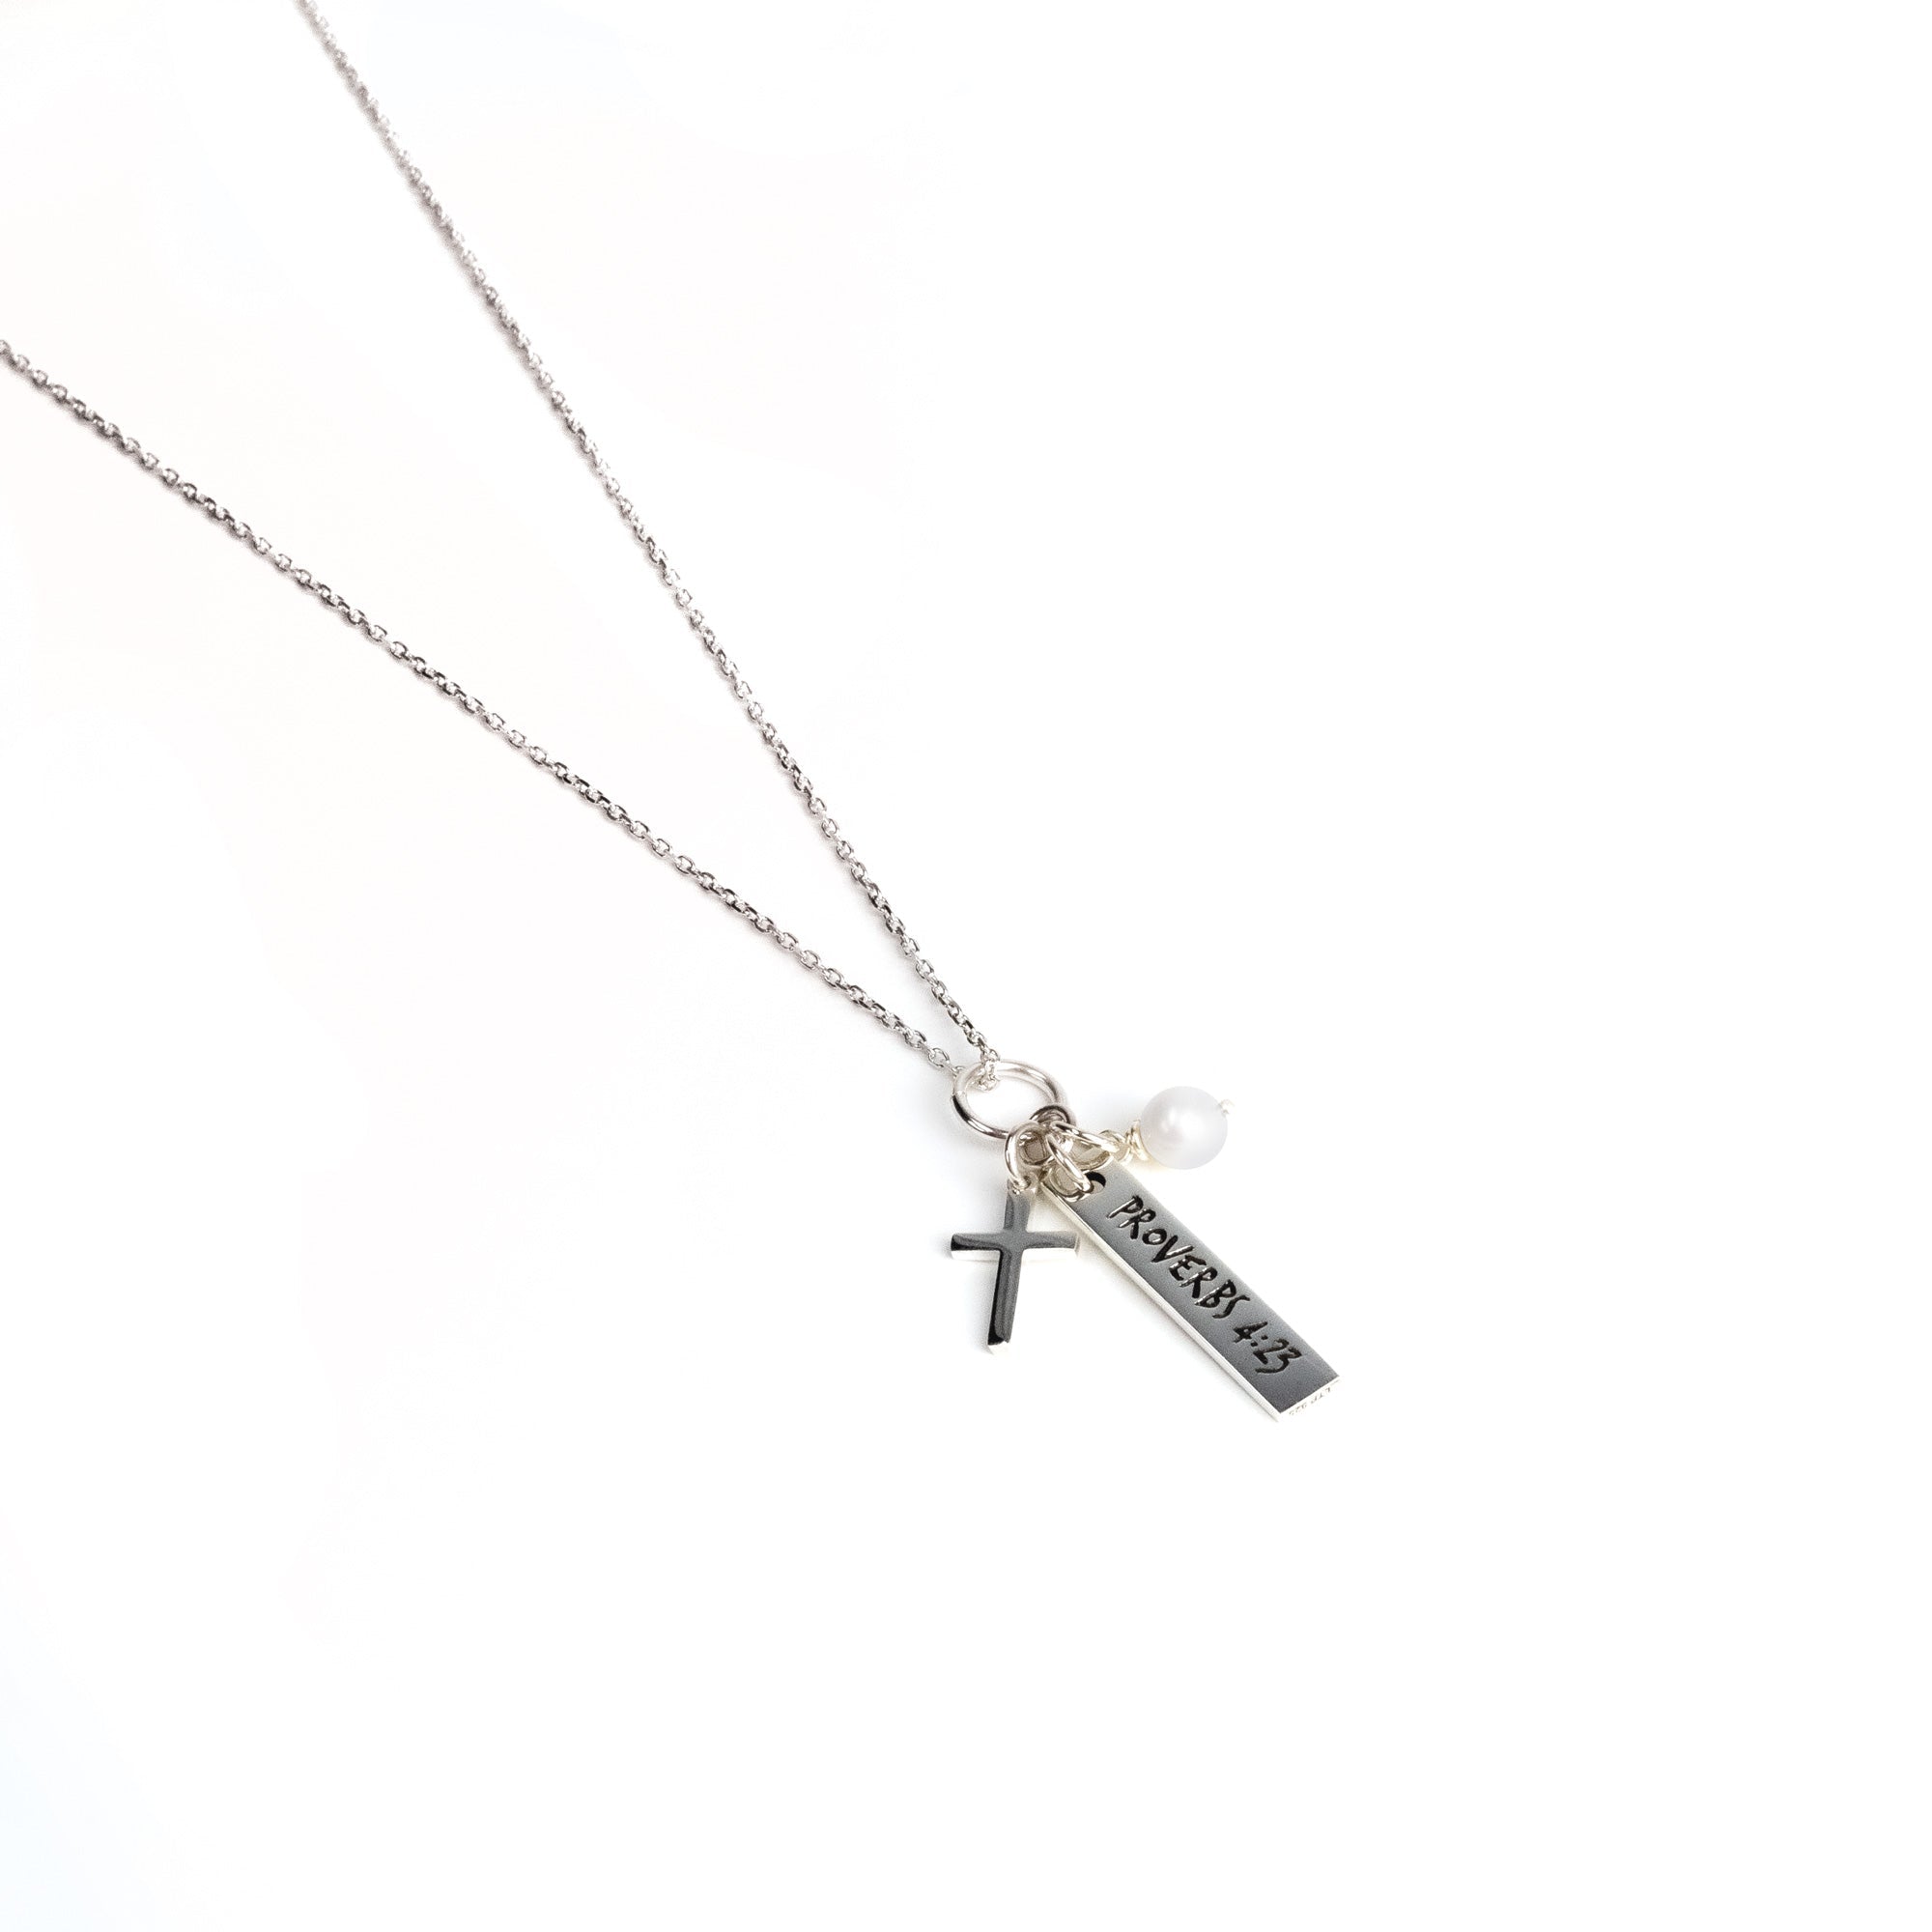 Guard Your Heart, Sterling Silver Scripture Cross Necklace